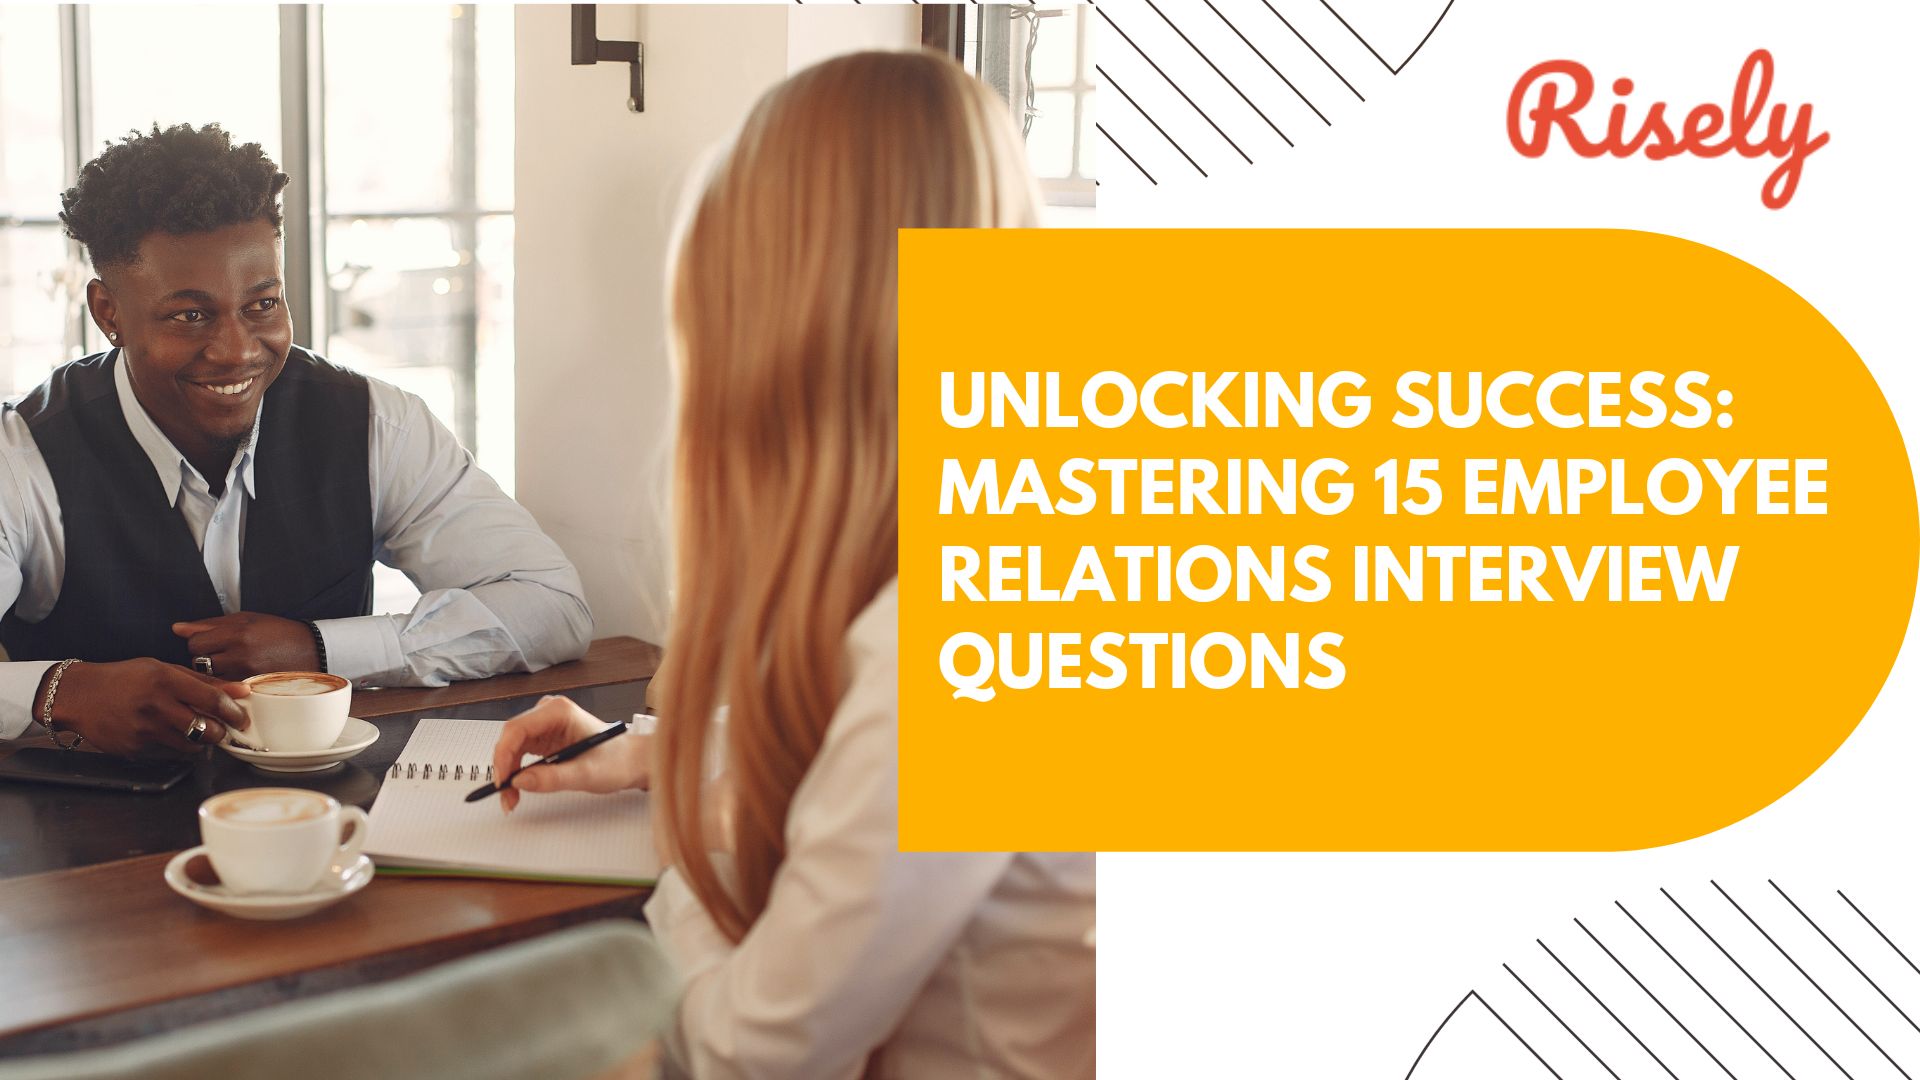 Unlocking Success: Mastering 15 Employee Relations Interview Questions